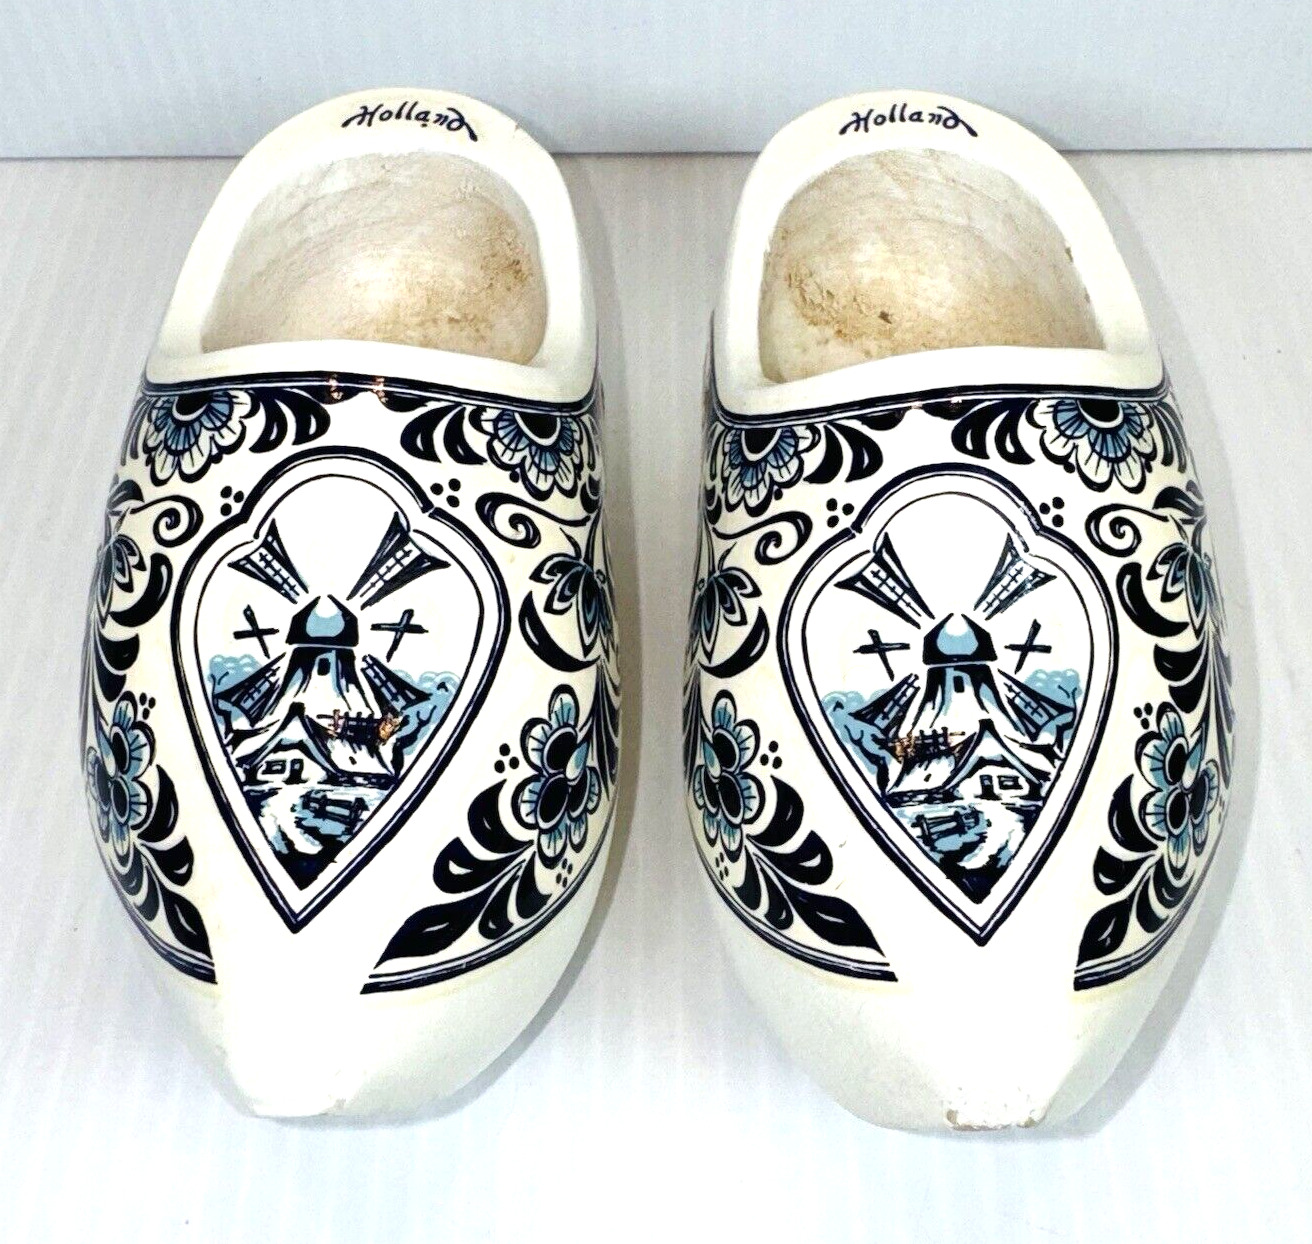 Vintage Holland Dutch Clog Blue & White Wooden Carved Shoes Hand Painted - EUC